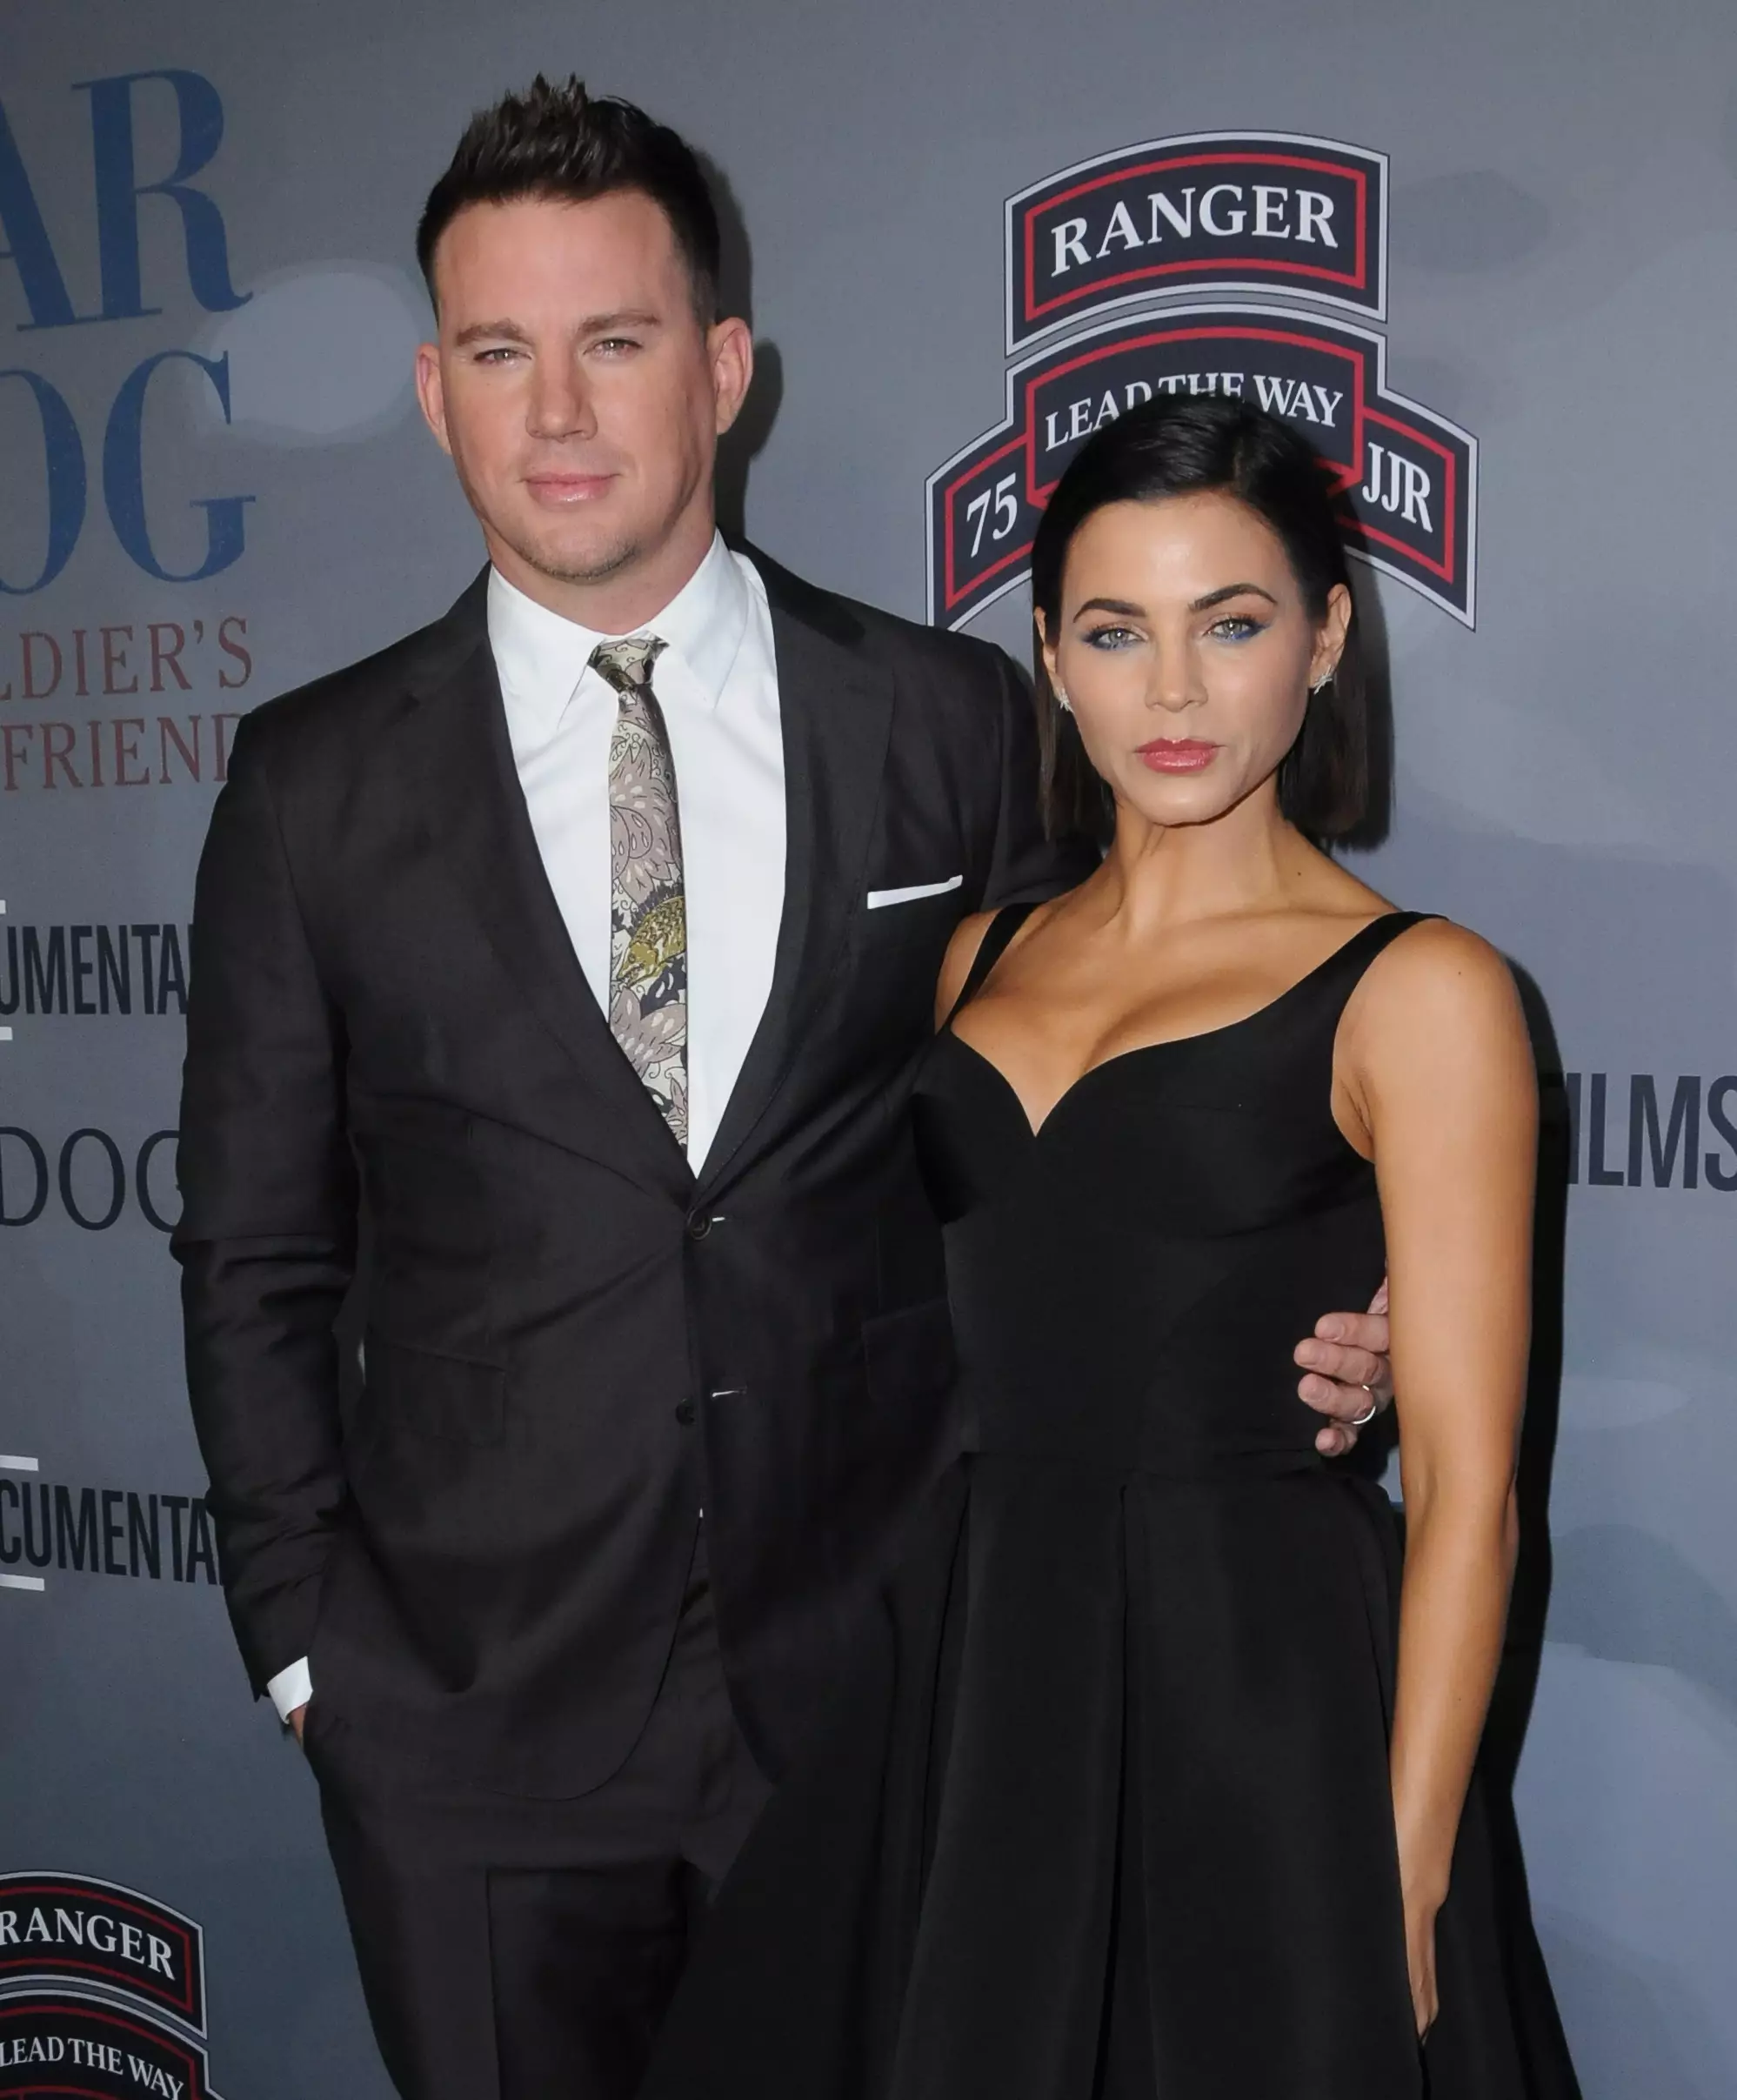 Channing Tatum and Jenna Dewan were married for almost 10 years (